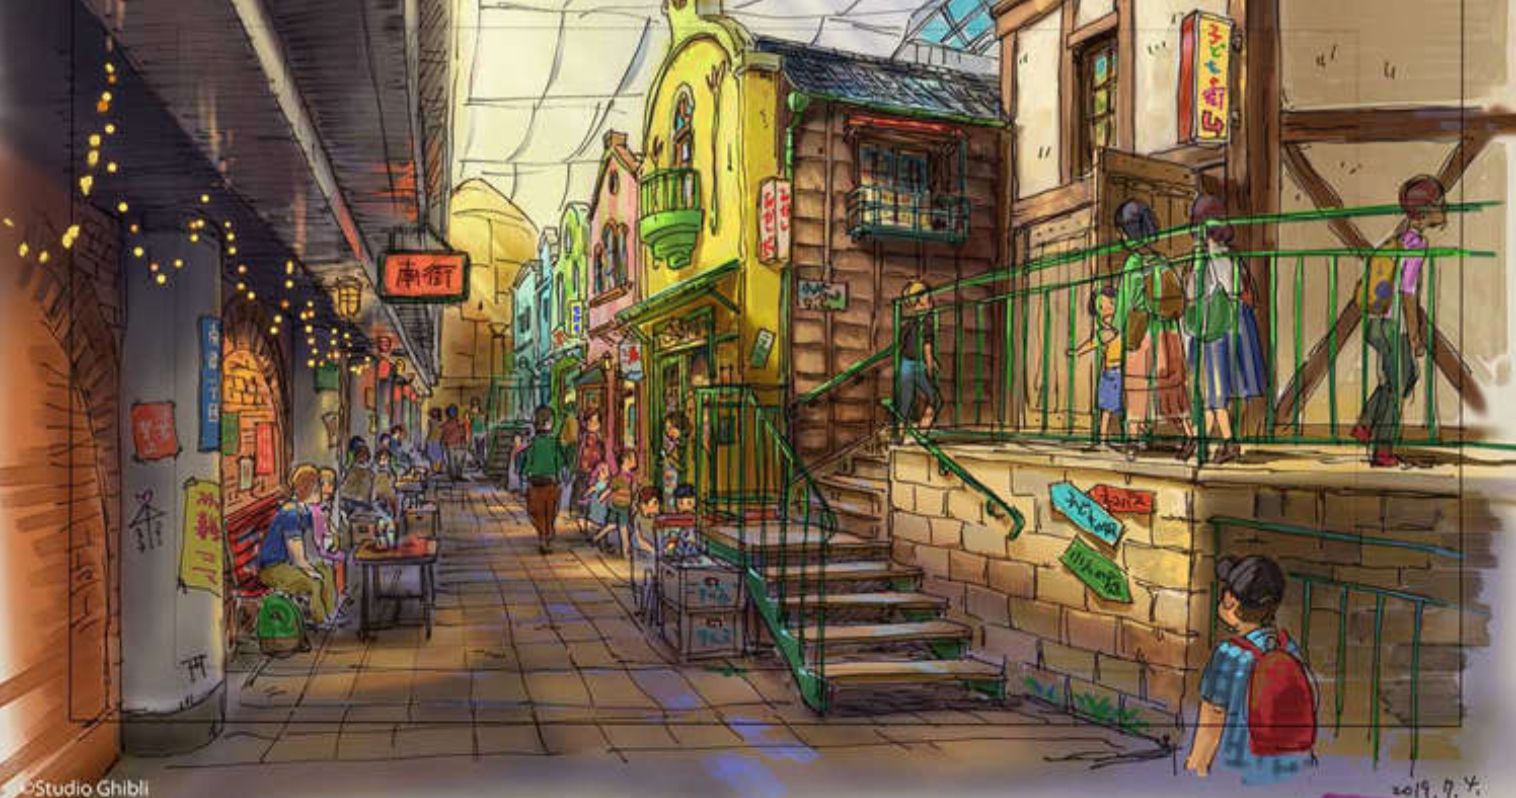 Ghibli Park Details and Art Whisk Fans Into the World of Spirited Away and Princess Mononoke